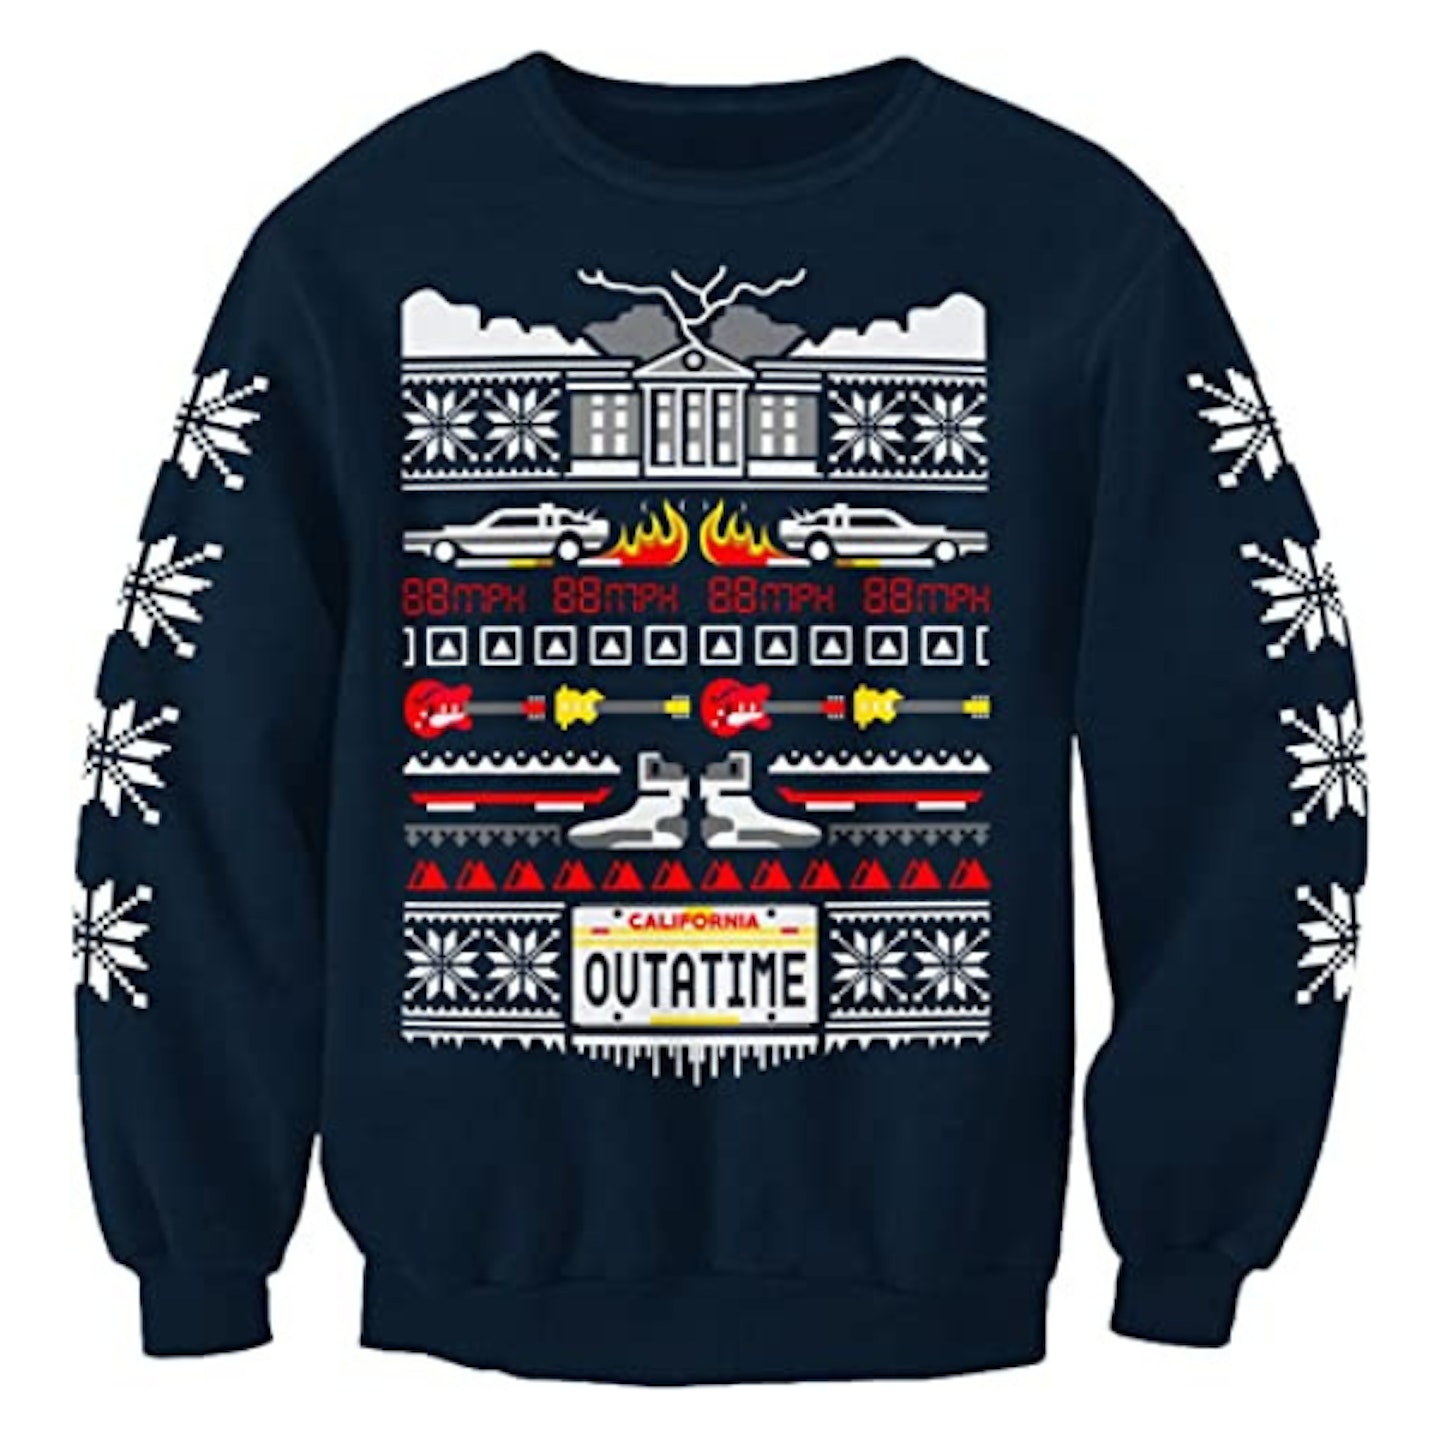 Back to The Future Inspired Film Christmas Jumper Sweatshirt Adults